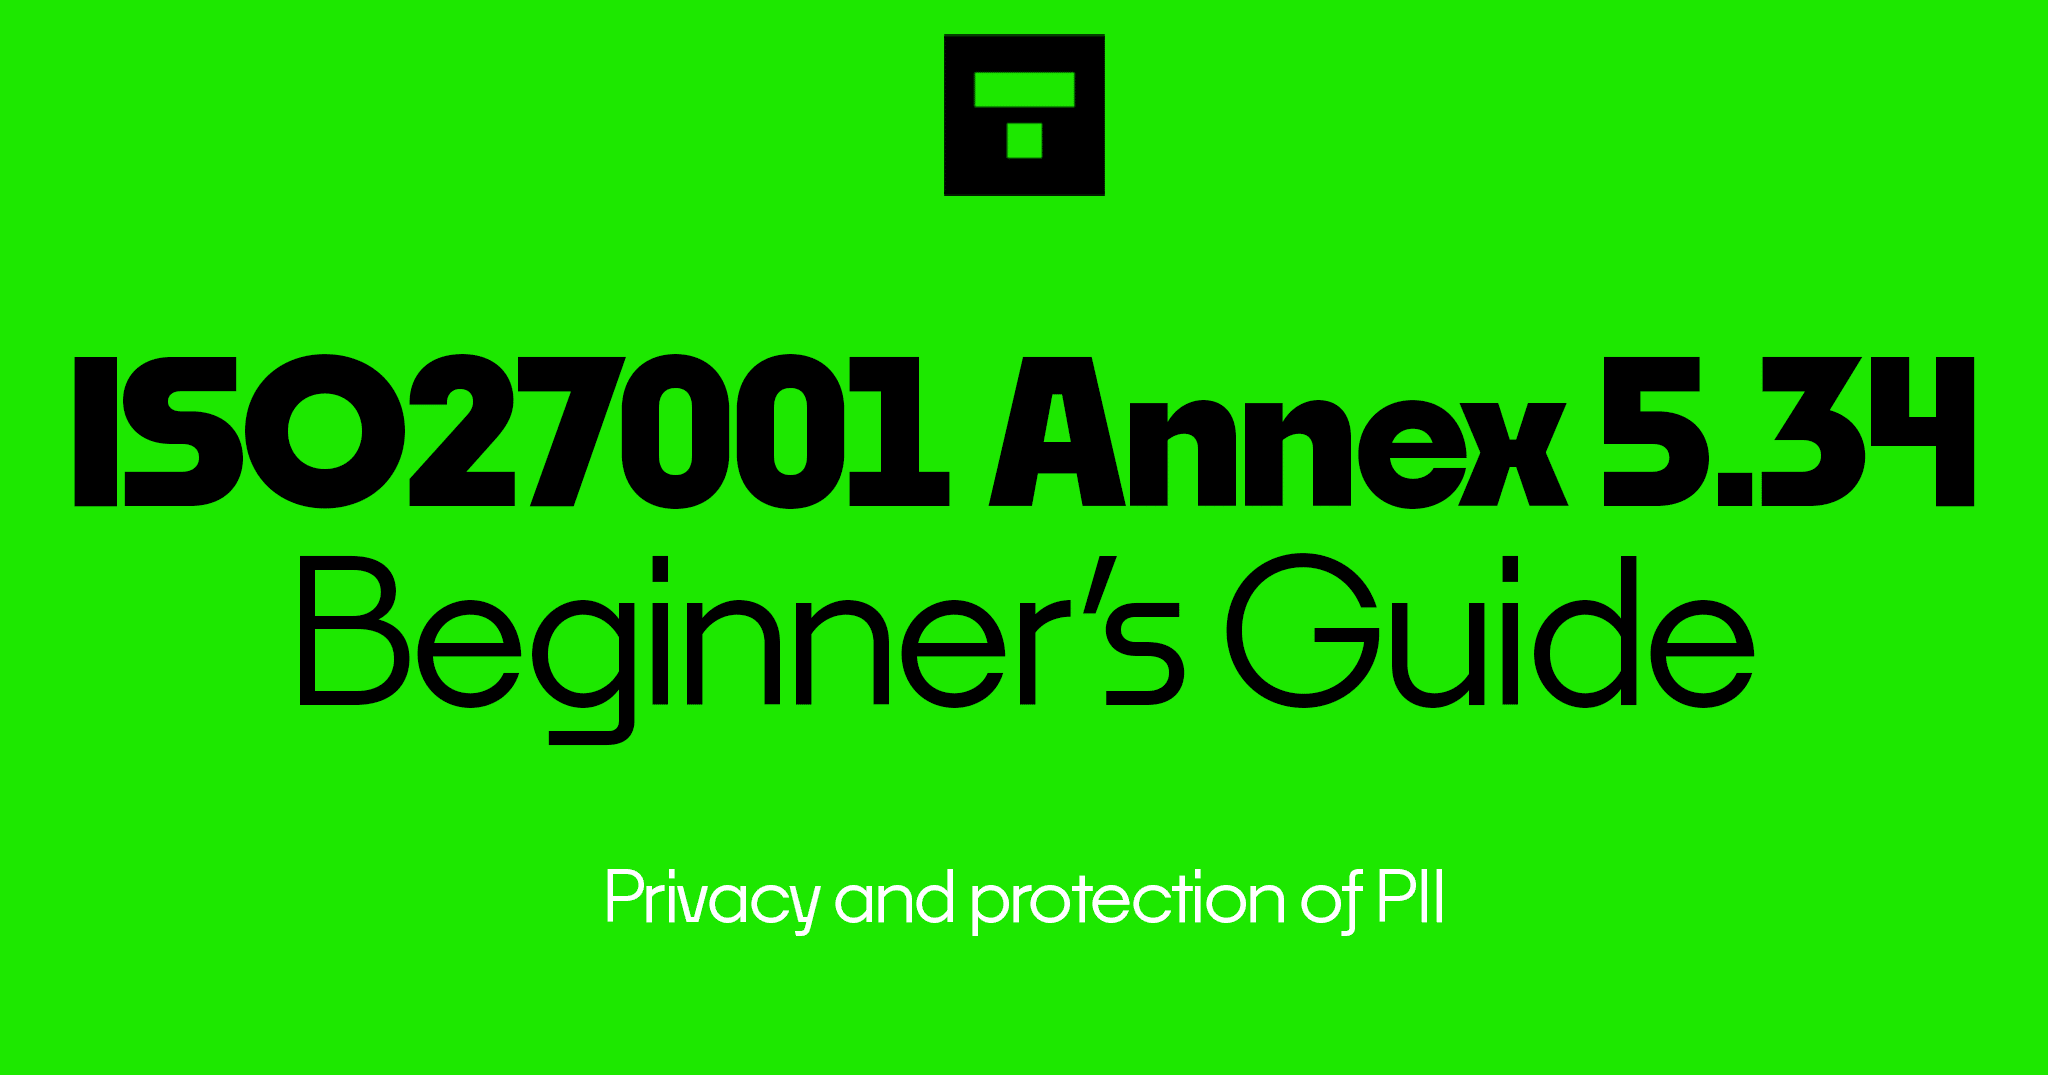 ISO 27001 Annex A 5.34 Privacy and protection of PII Beginner's Guide